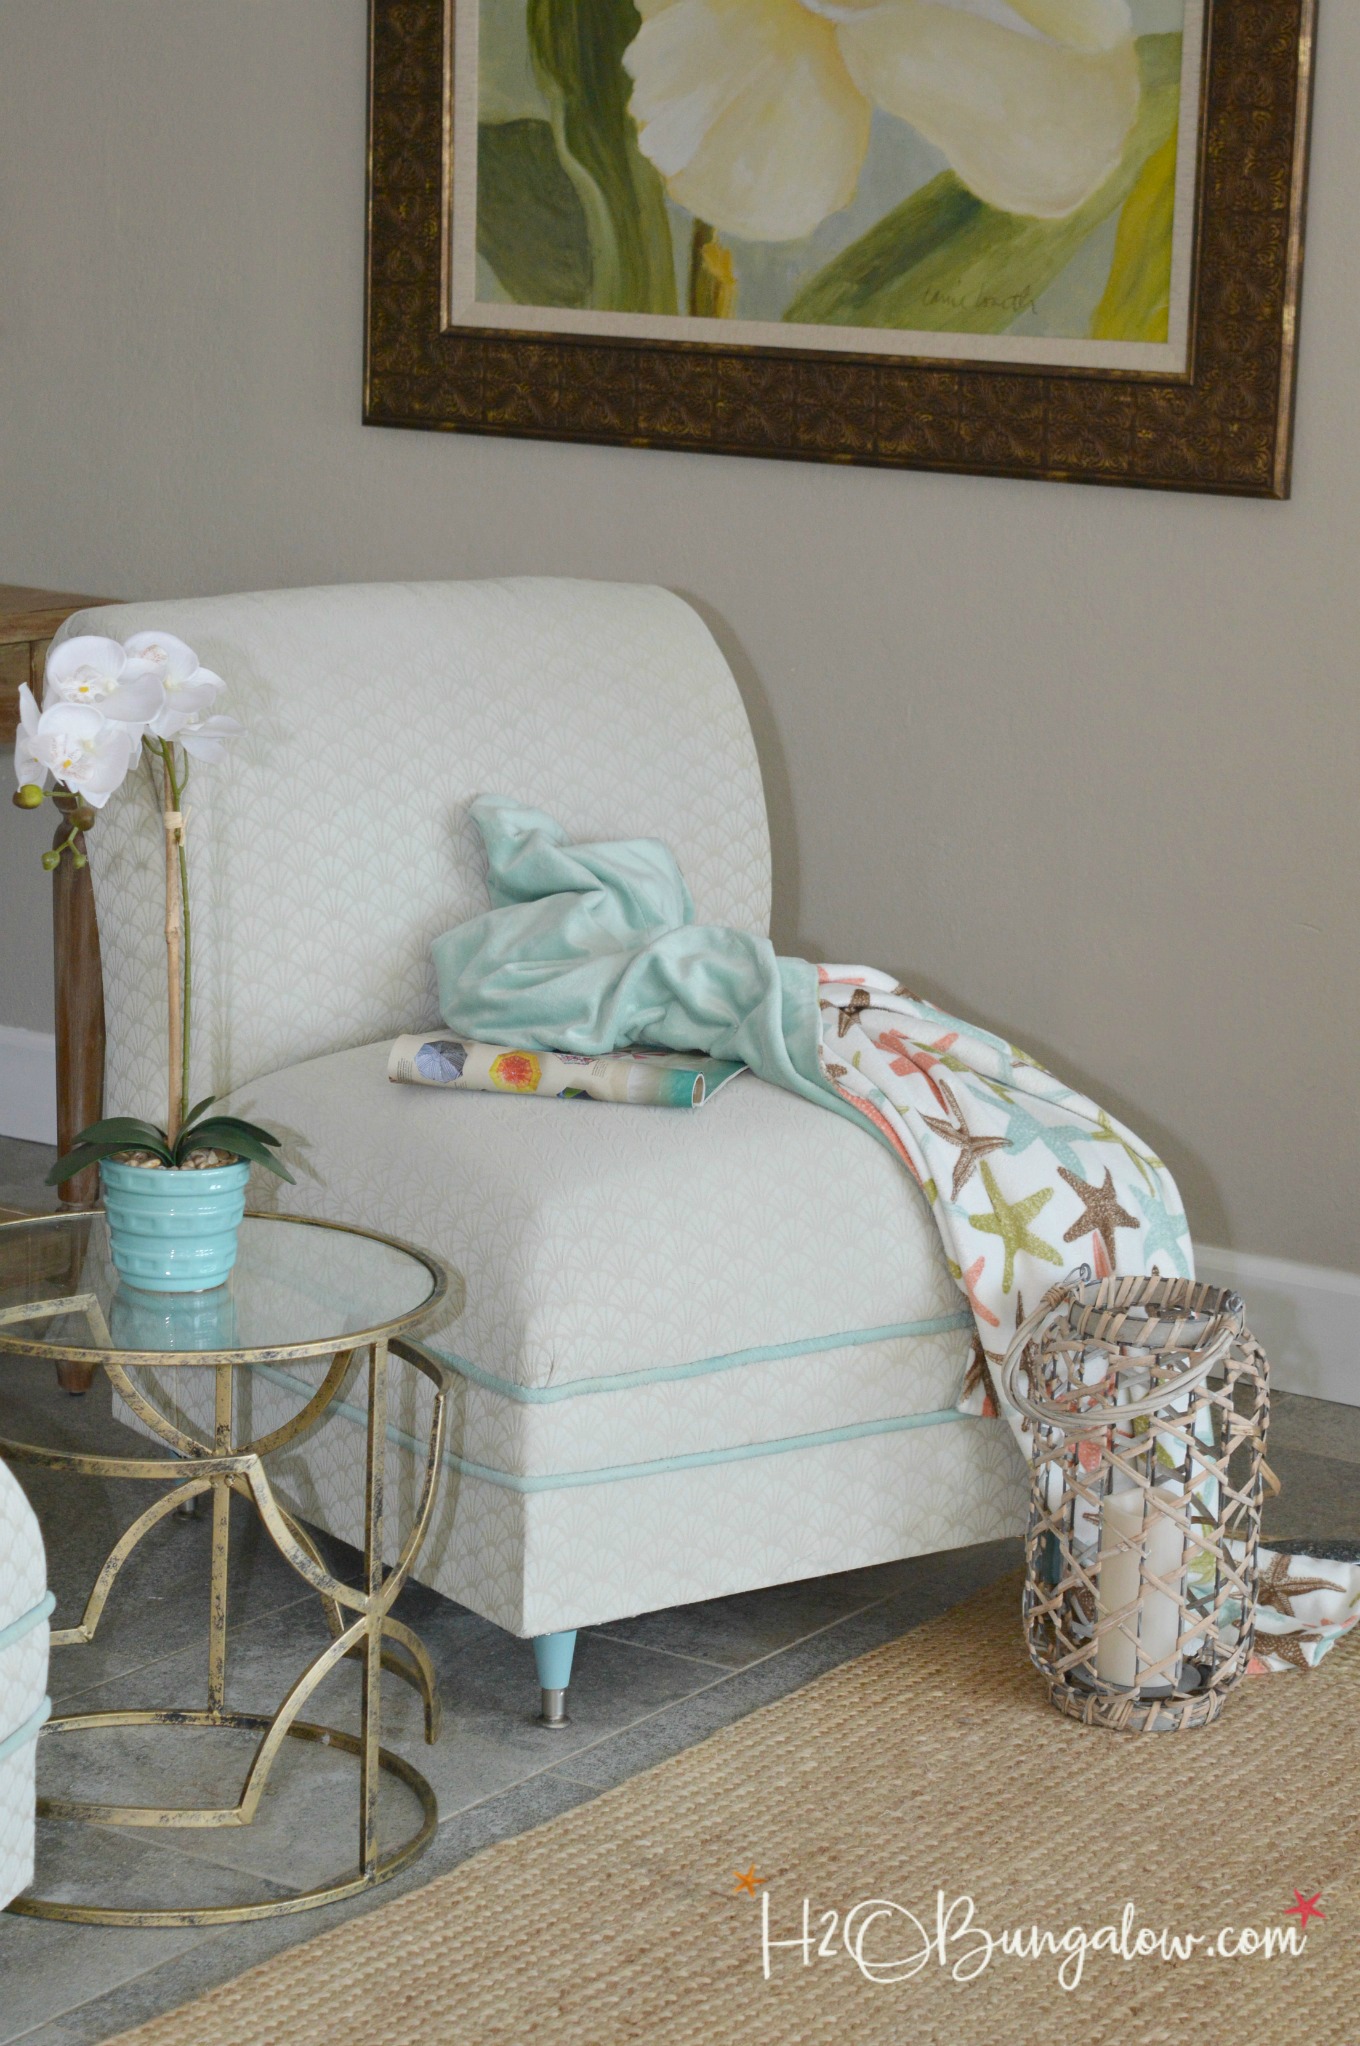 DIY painted upholstered chair makeover tutorial. How to paint a fabric chair with latex paint, add new trim and change the furniture legs for an easy update. Find over 450 home decor DIY tutorials on H2OBungalow.com